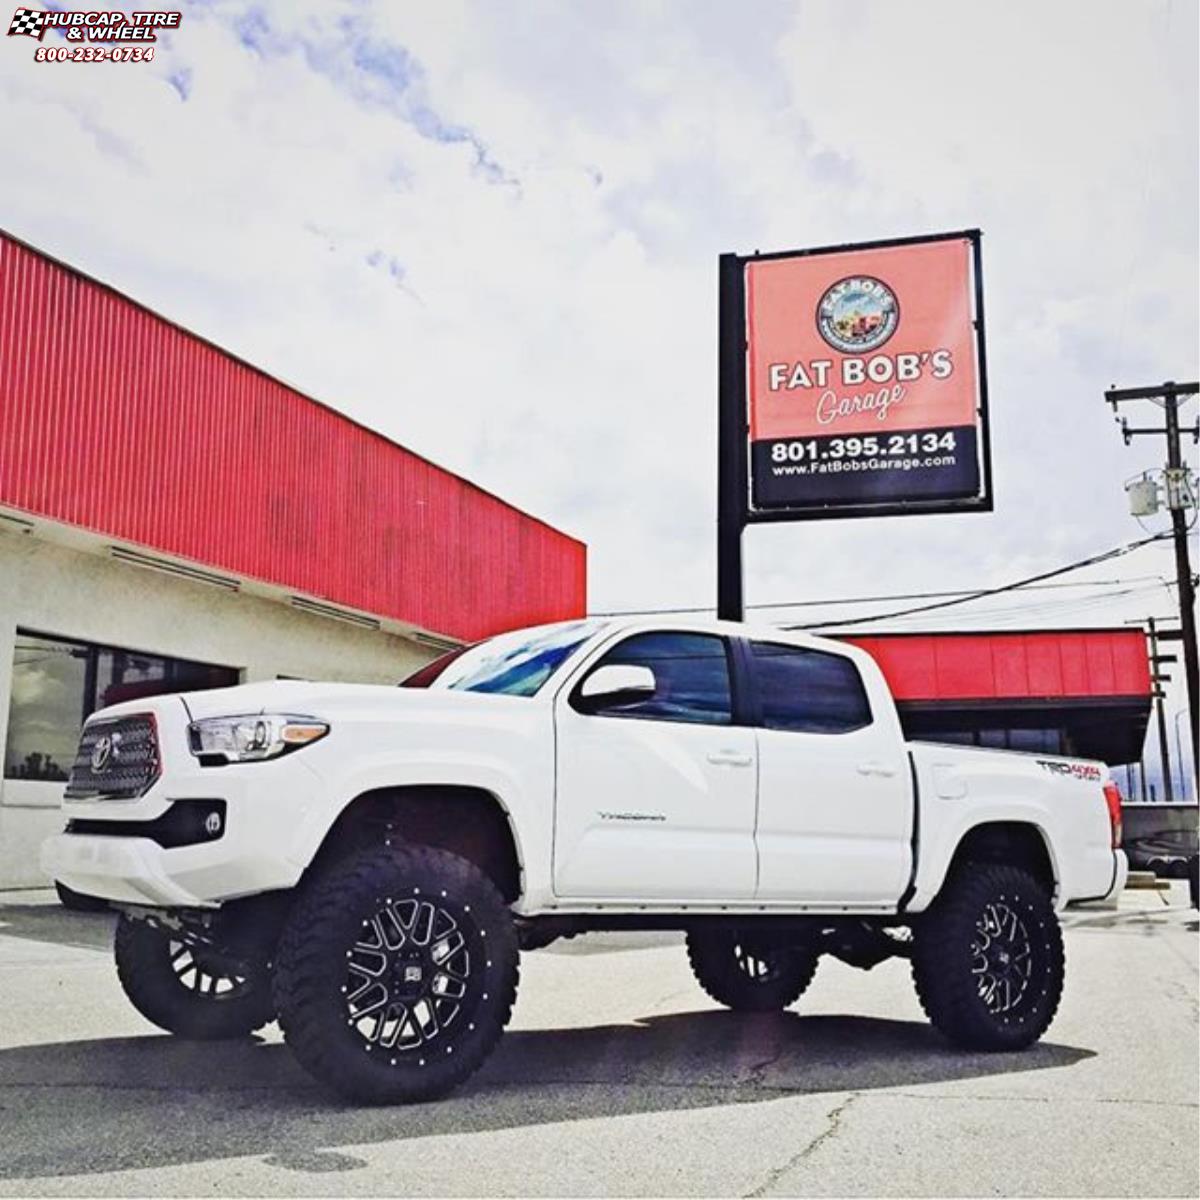 vehicle gallery/2016 toyota tacoma xd series xd820 grenade  Satin Black Milled wheels and rims